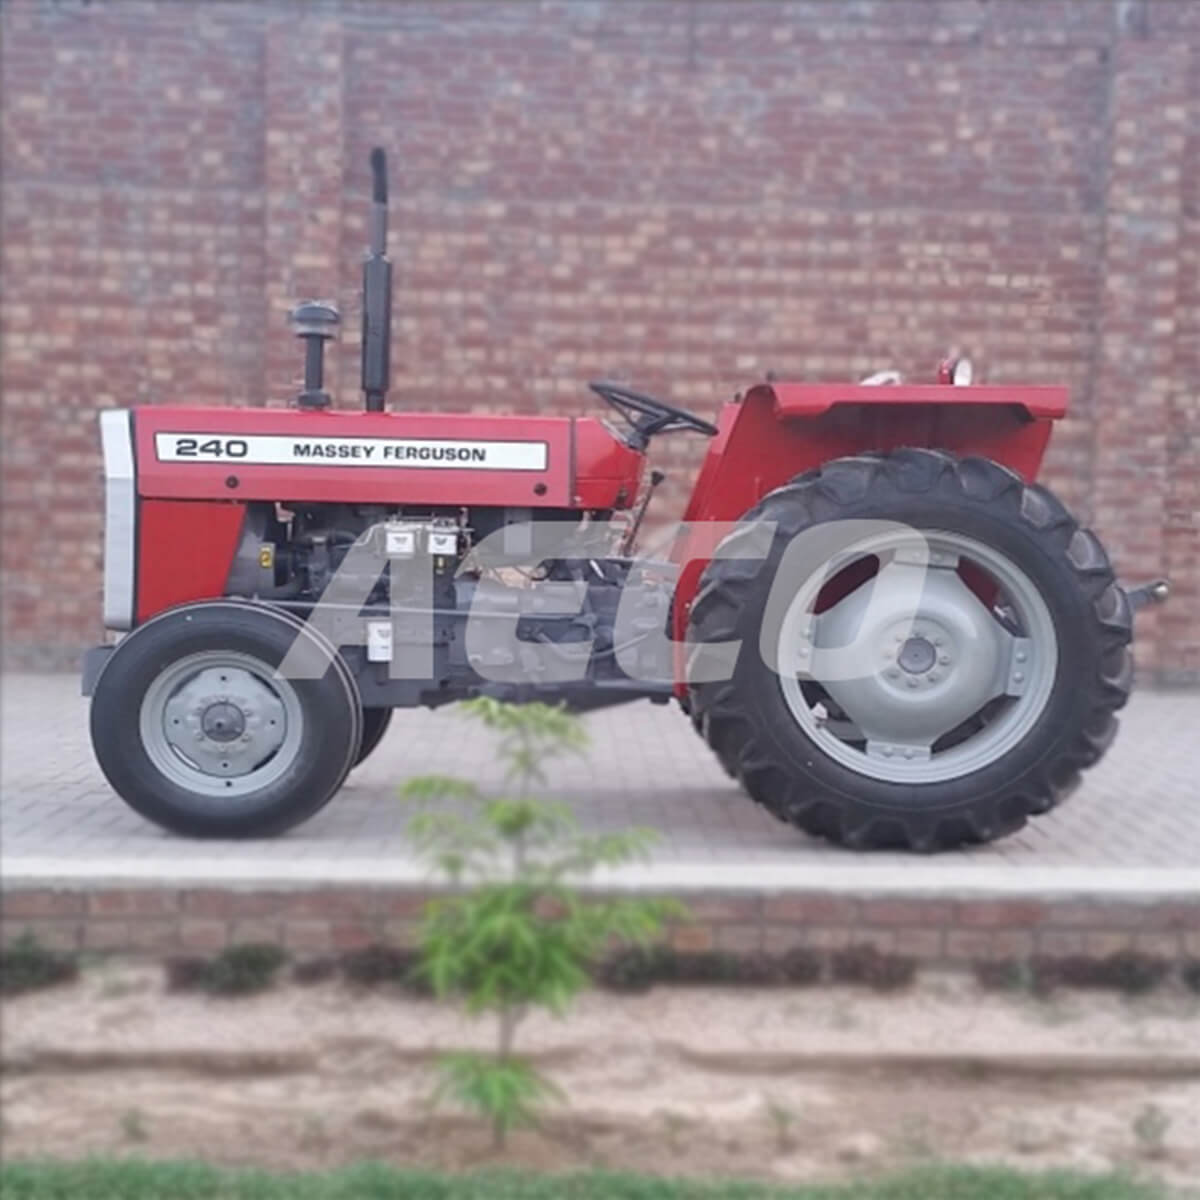 MF 240 TRACTOR FOR SALE